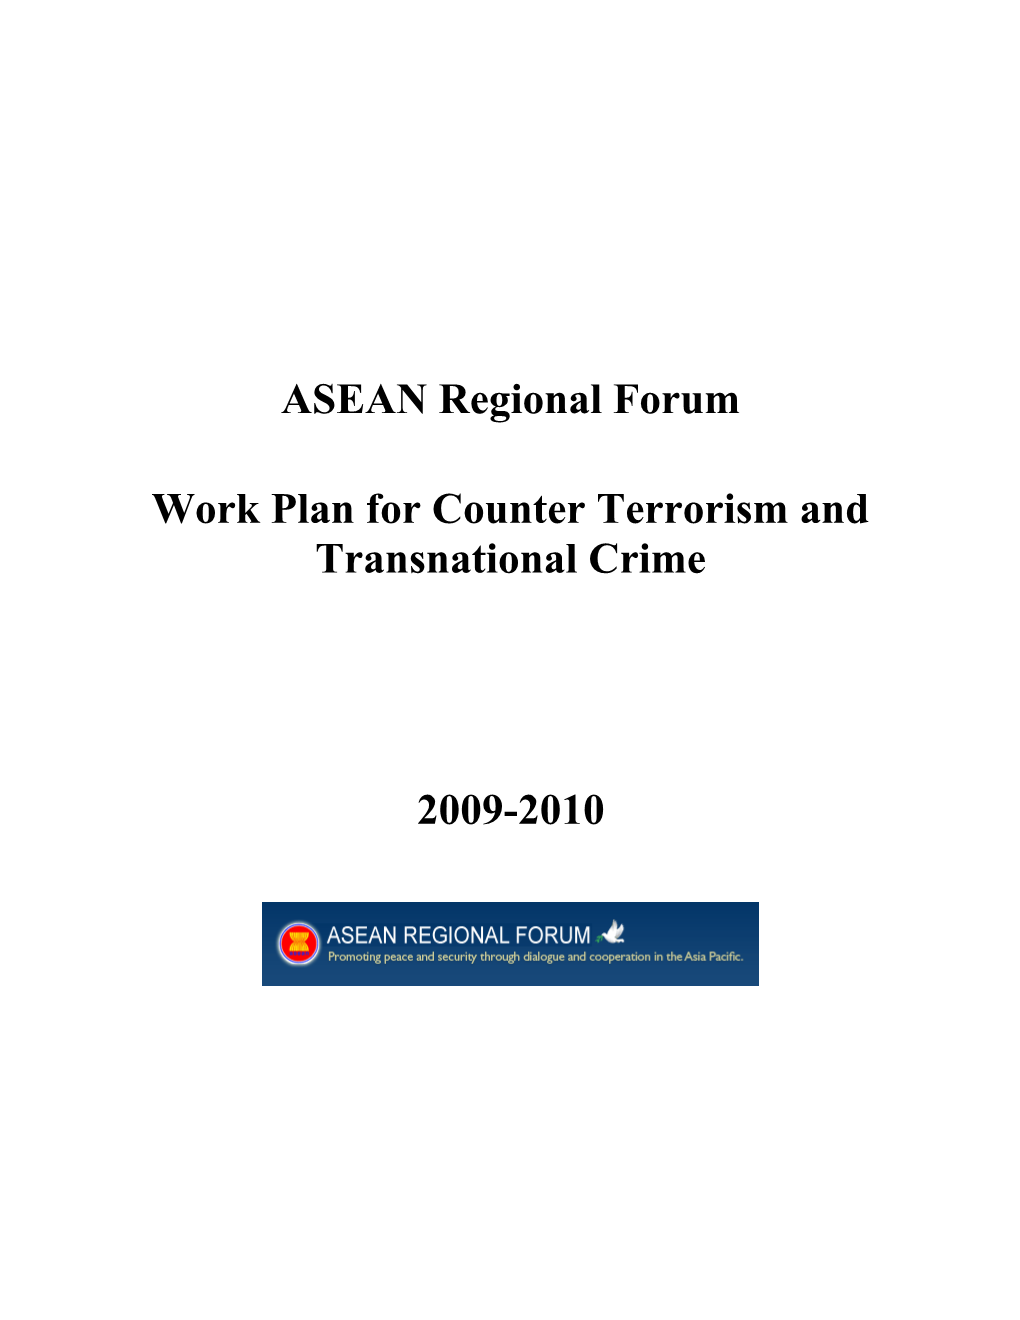 Work Plan for Counter Terrorism and Transnational Crime